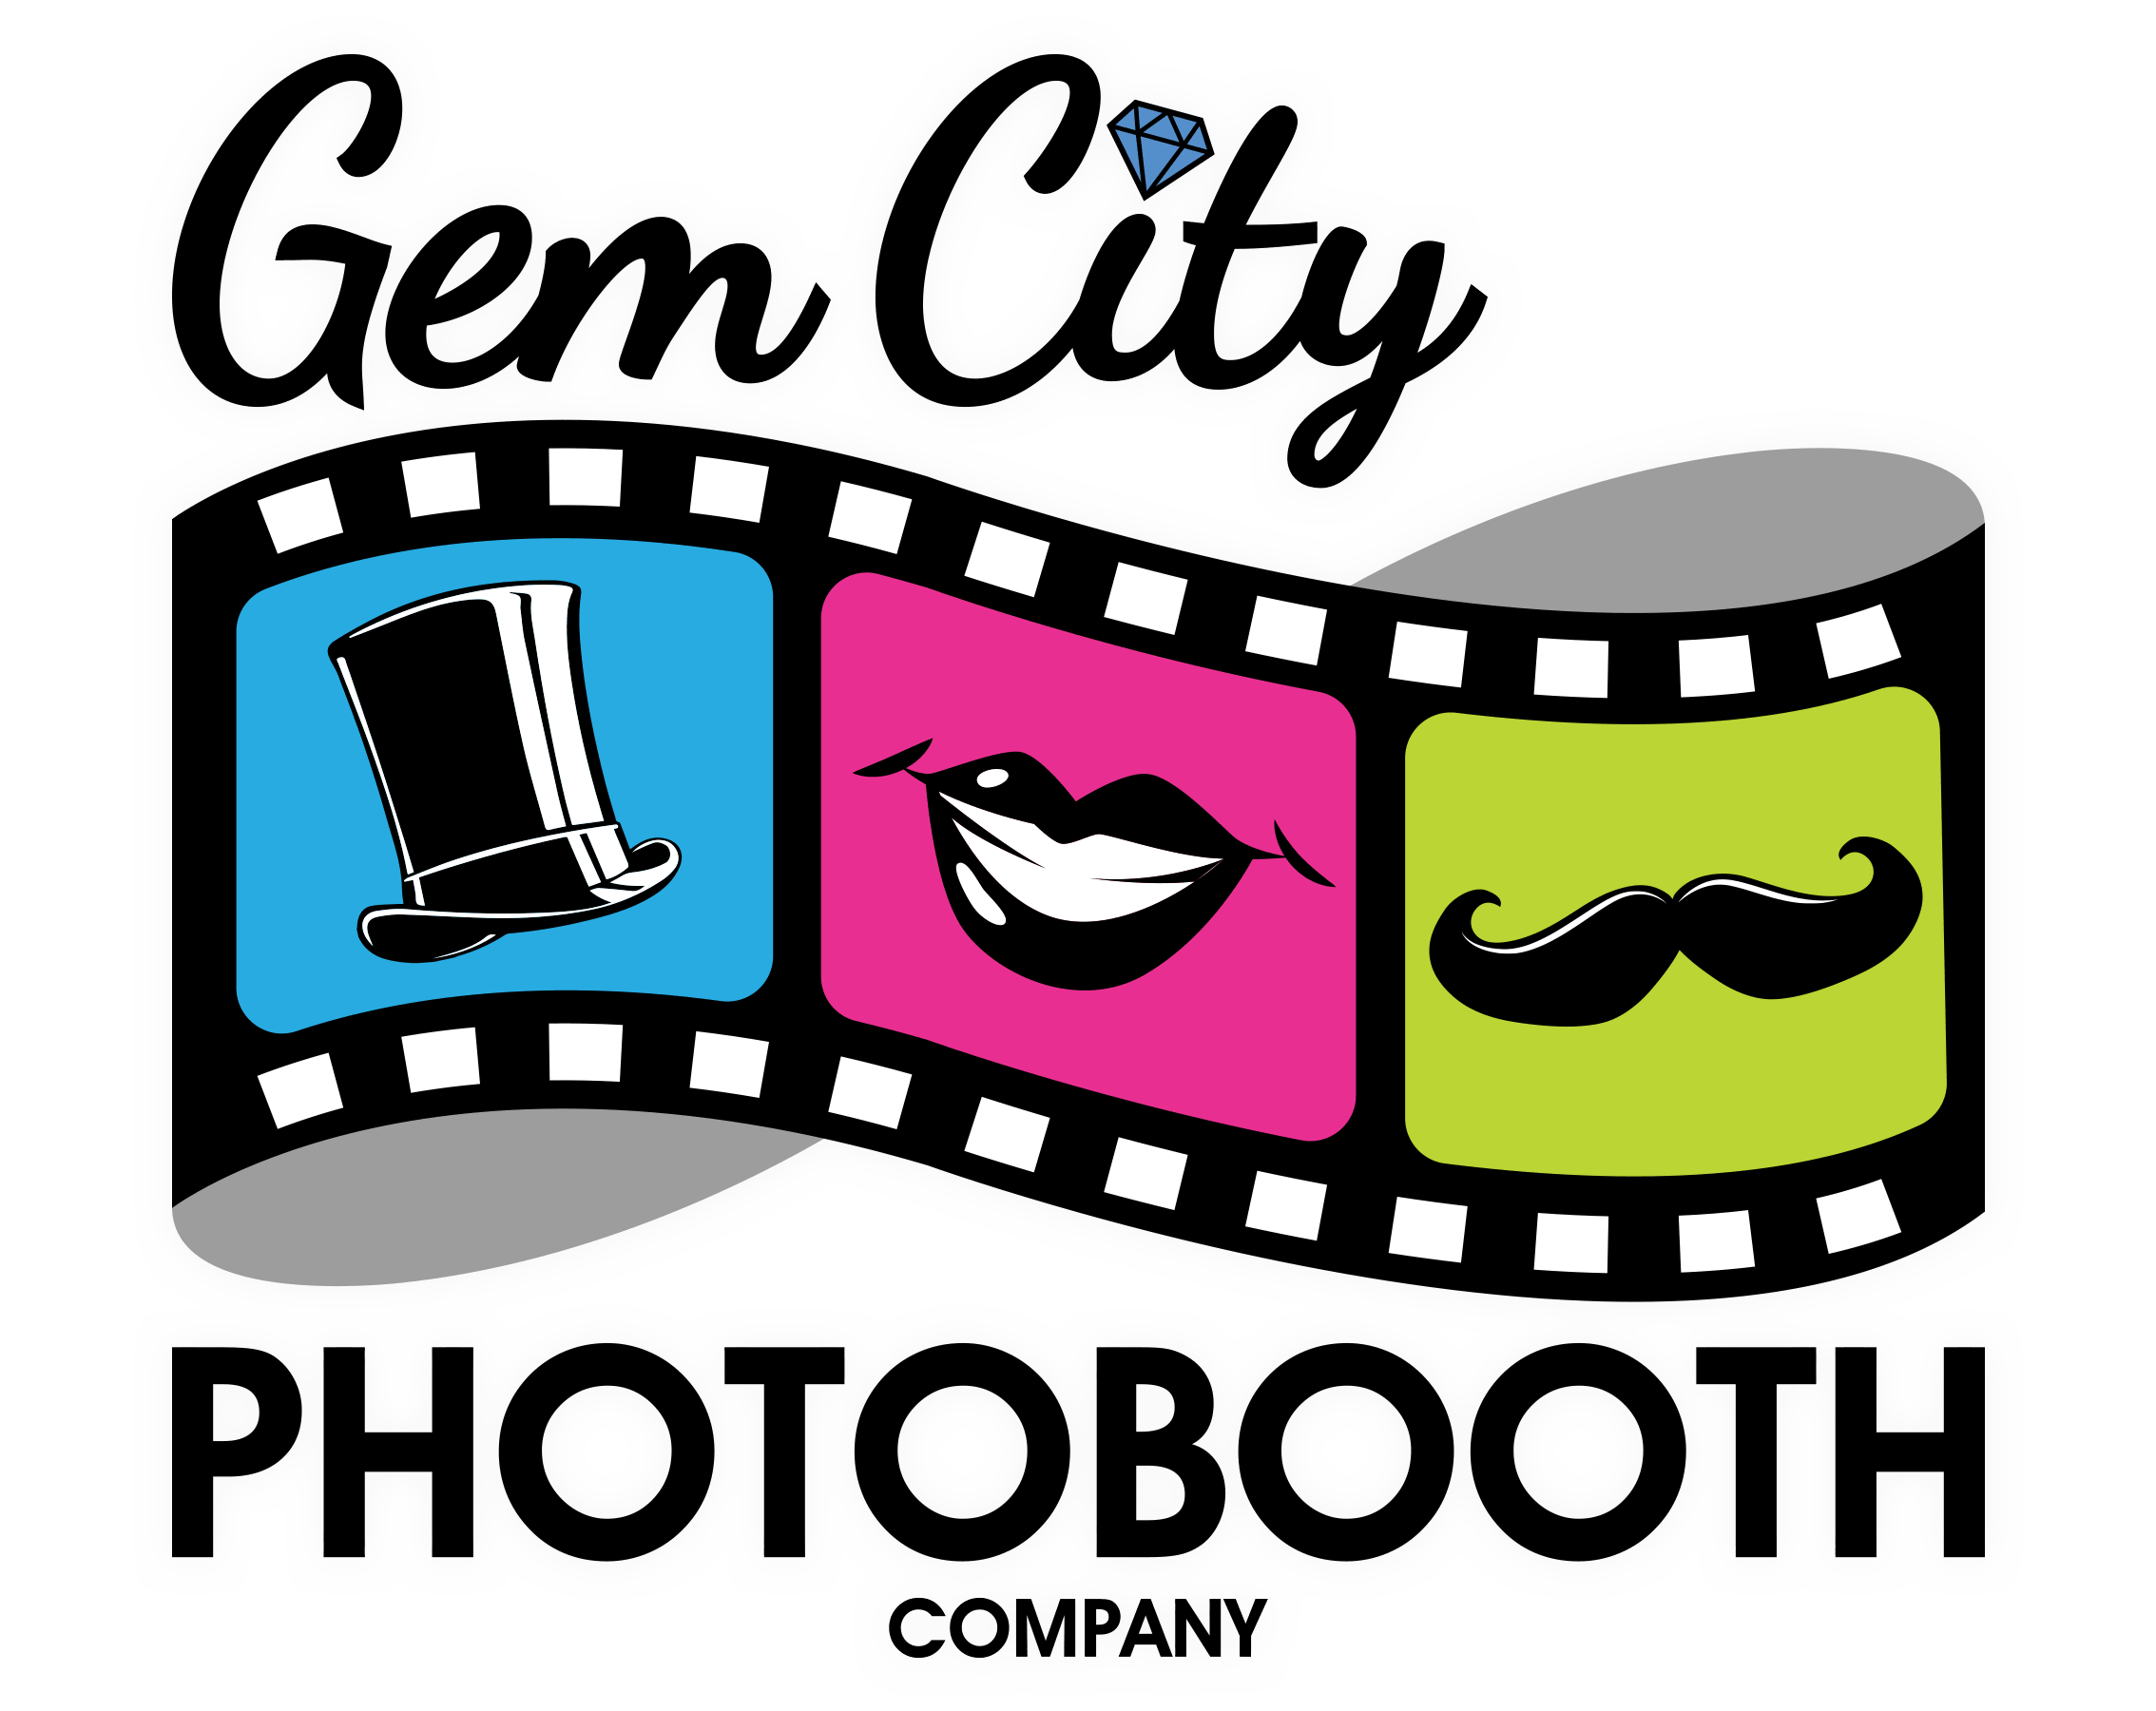 Gem city photo booth. Photography clipart photobooth